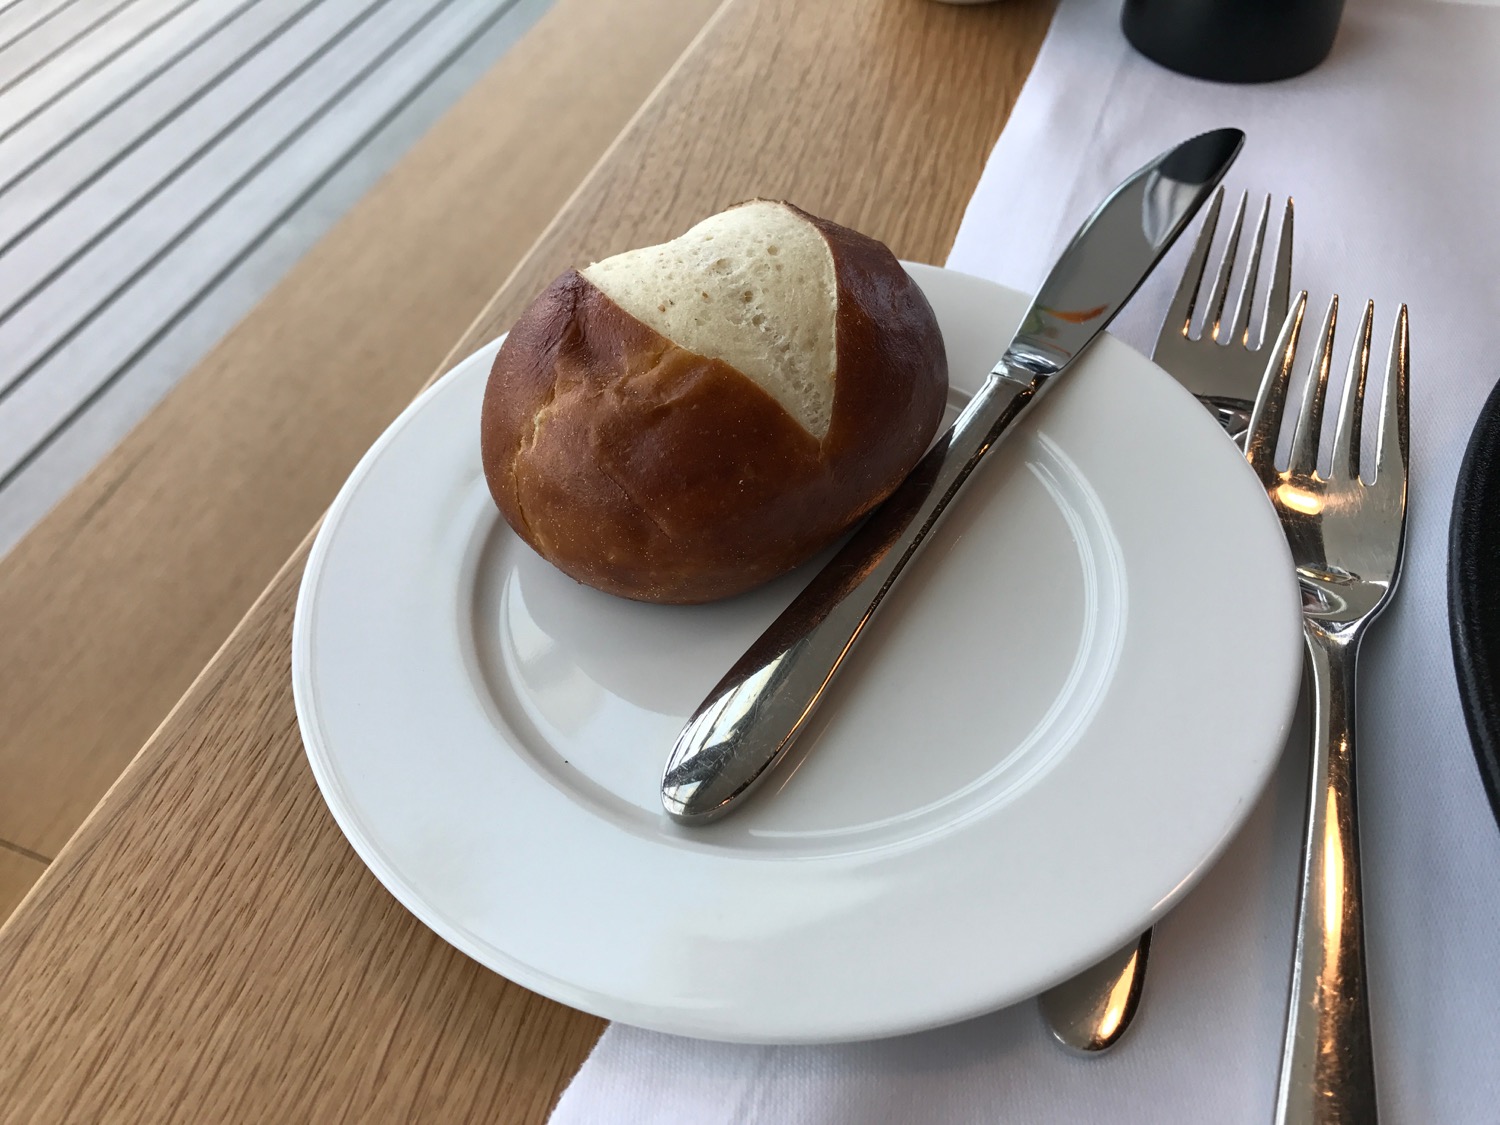 a bread roll on a plate with a knife and fork